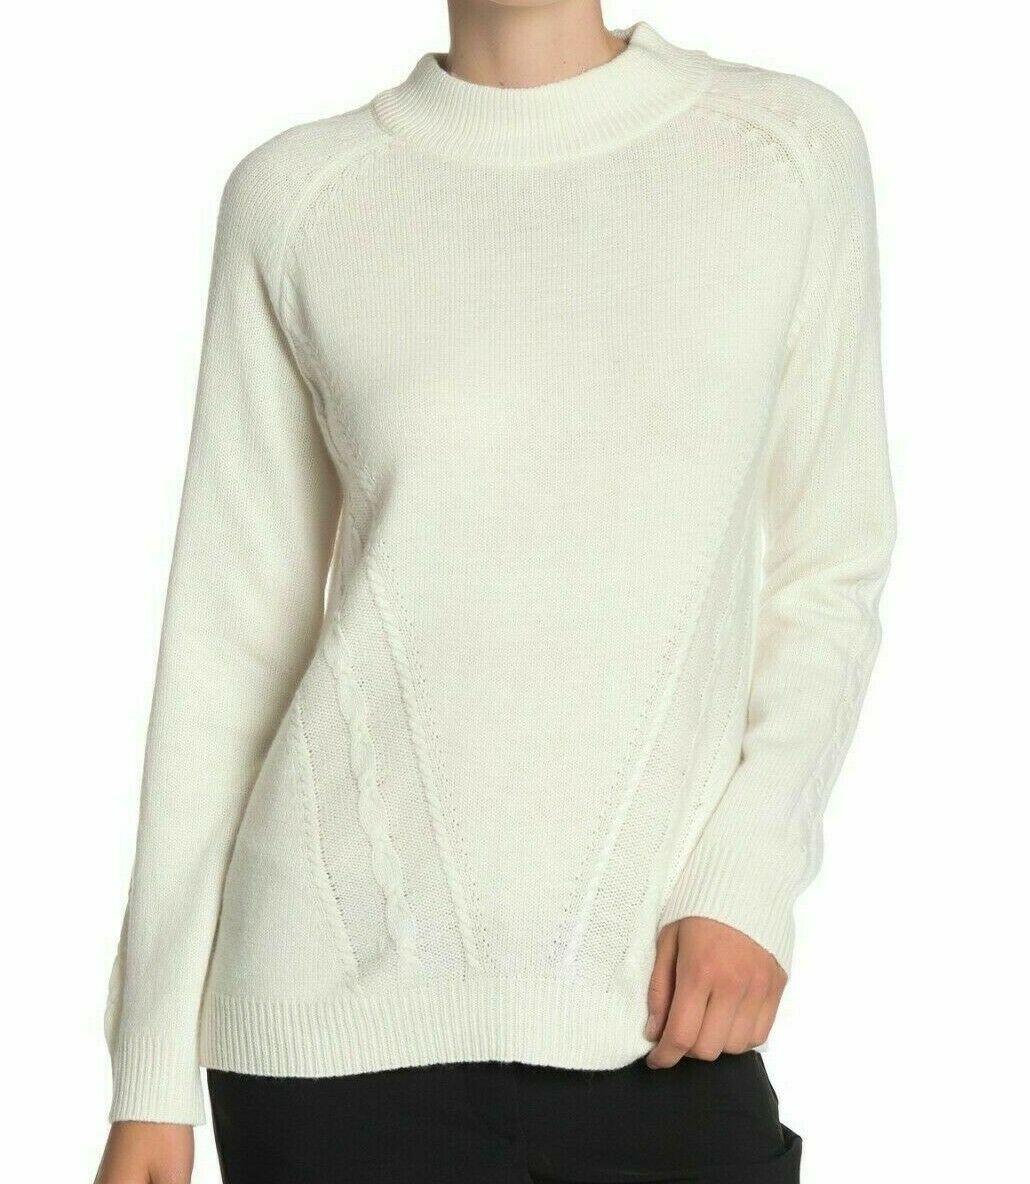 Nanette Lepore Womens Cashmere Cable Knit Sweater Cannoli Cream Size L - SVNYFancy